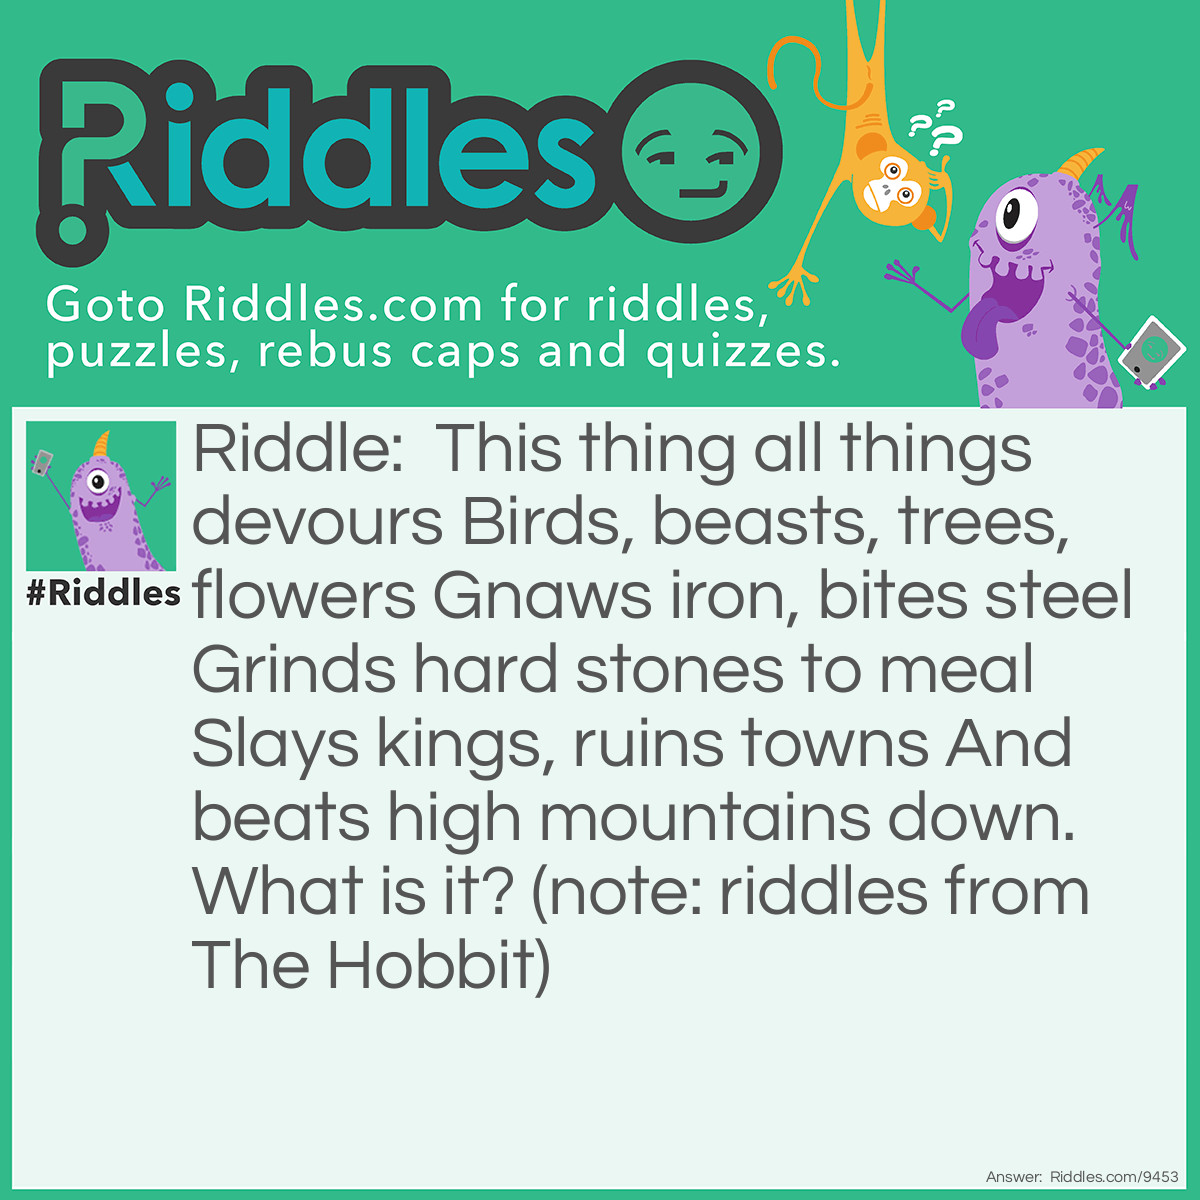 Riddle: This thing all things devours Birds, beasts, trees, flowers Gnaws iron, bites steel Grinds hard stones to meal Slays kings, ruins towns And beats high mountains down. What is it? (note: riddles from The Hobbit) Answer: Time.